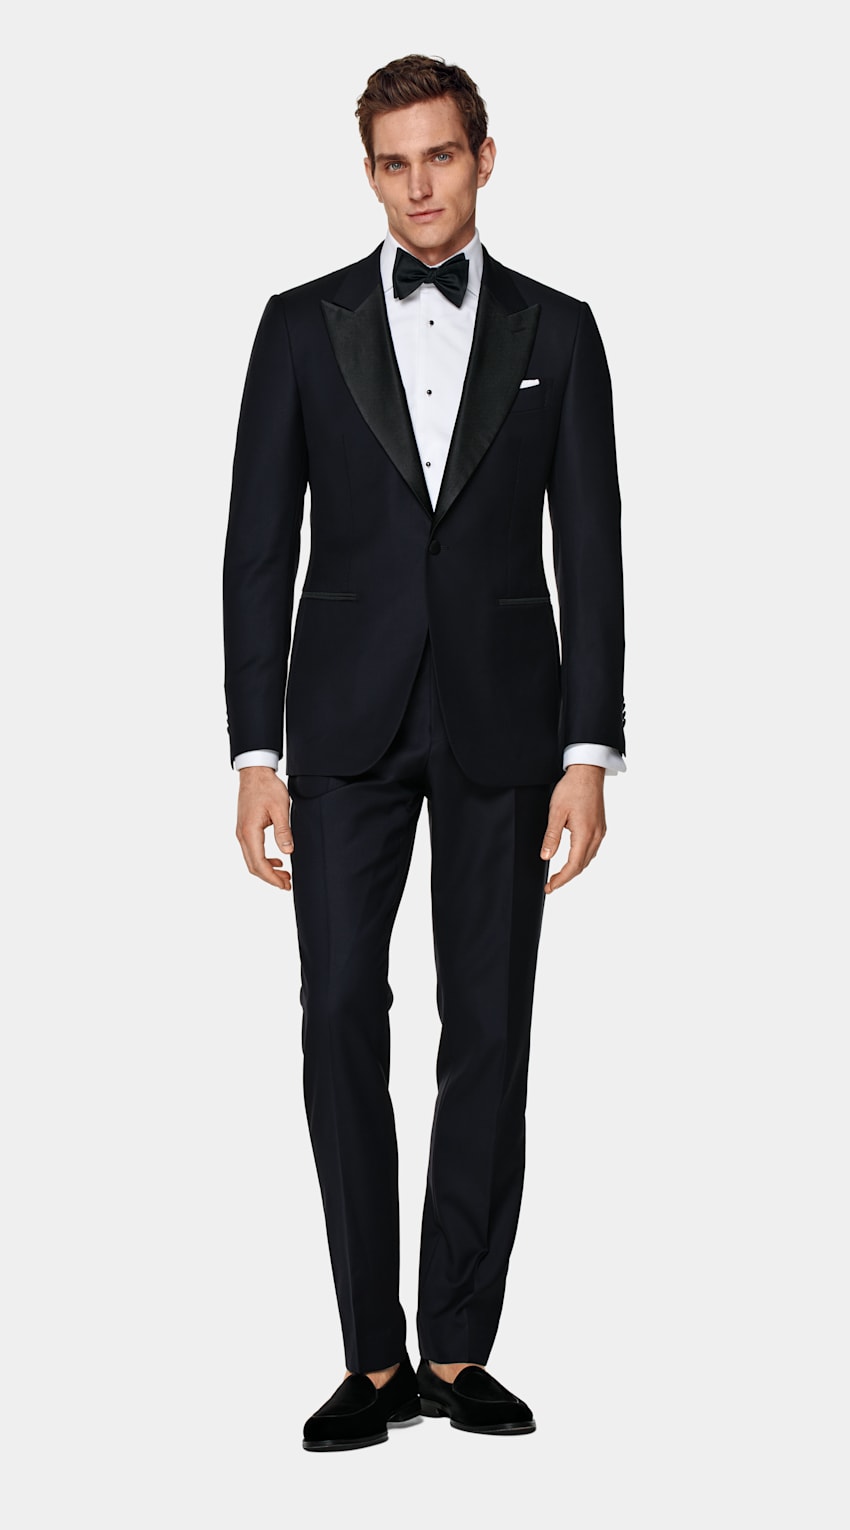 SUITSUPPLY Pure S110's Wool by Vitale Barberis Canonico, Italy Navy Tailored Fit Lazio Dinner Jacket